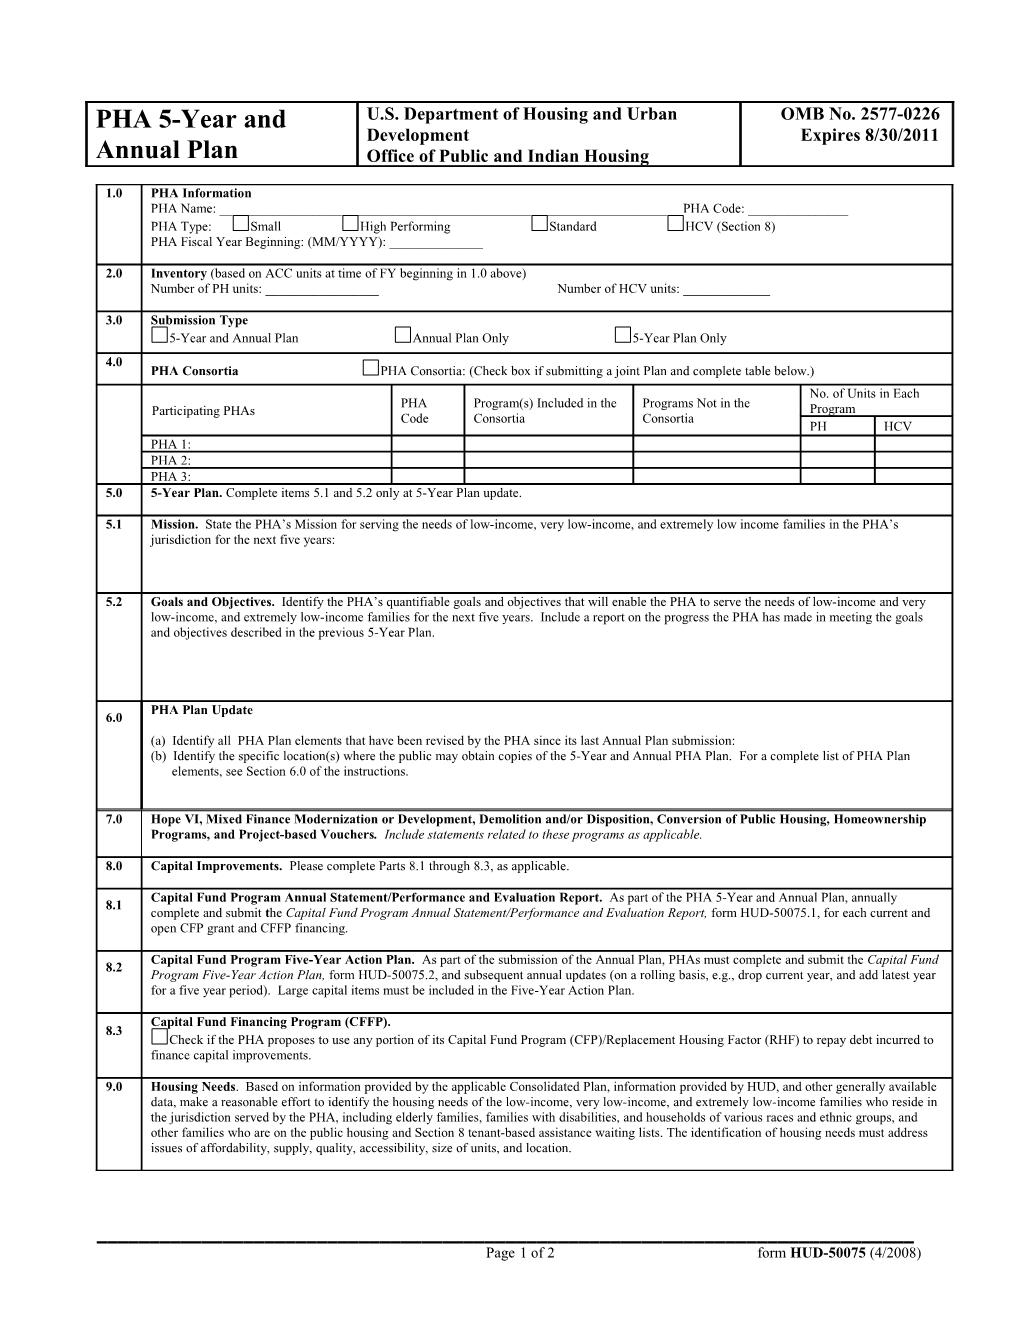 Page 1Of2 Form HUD-50075 (4/2008)